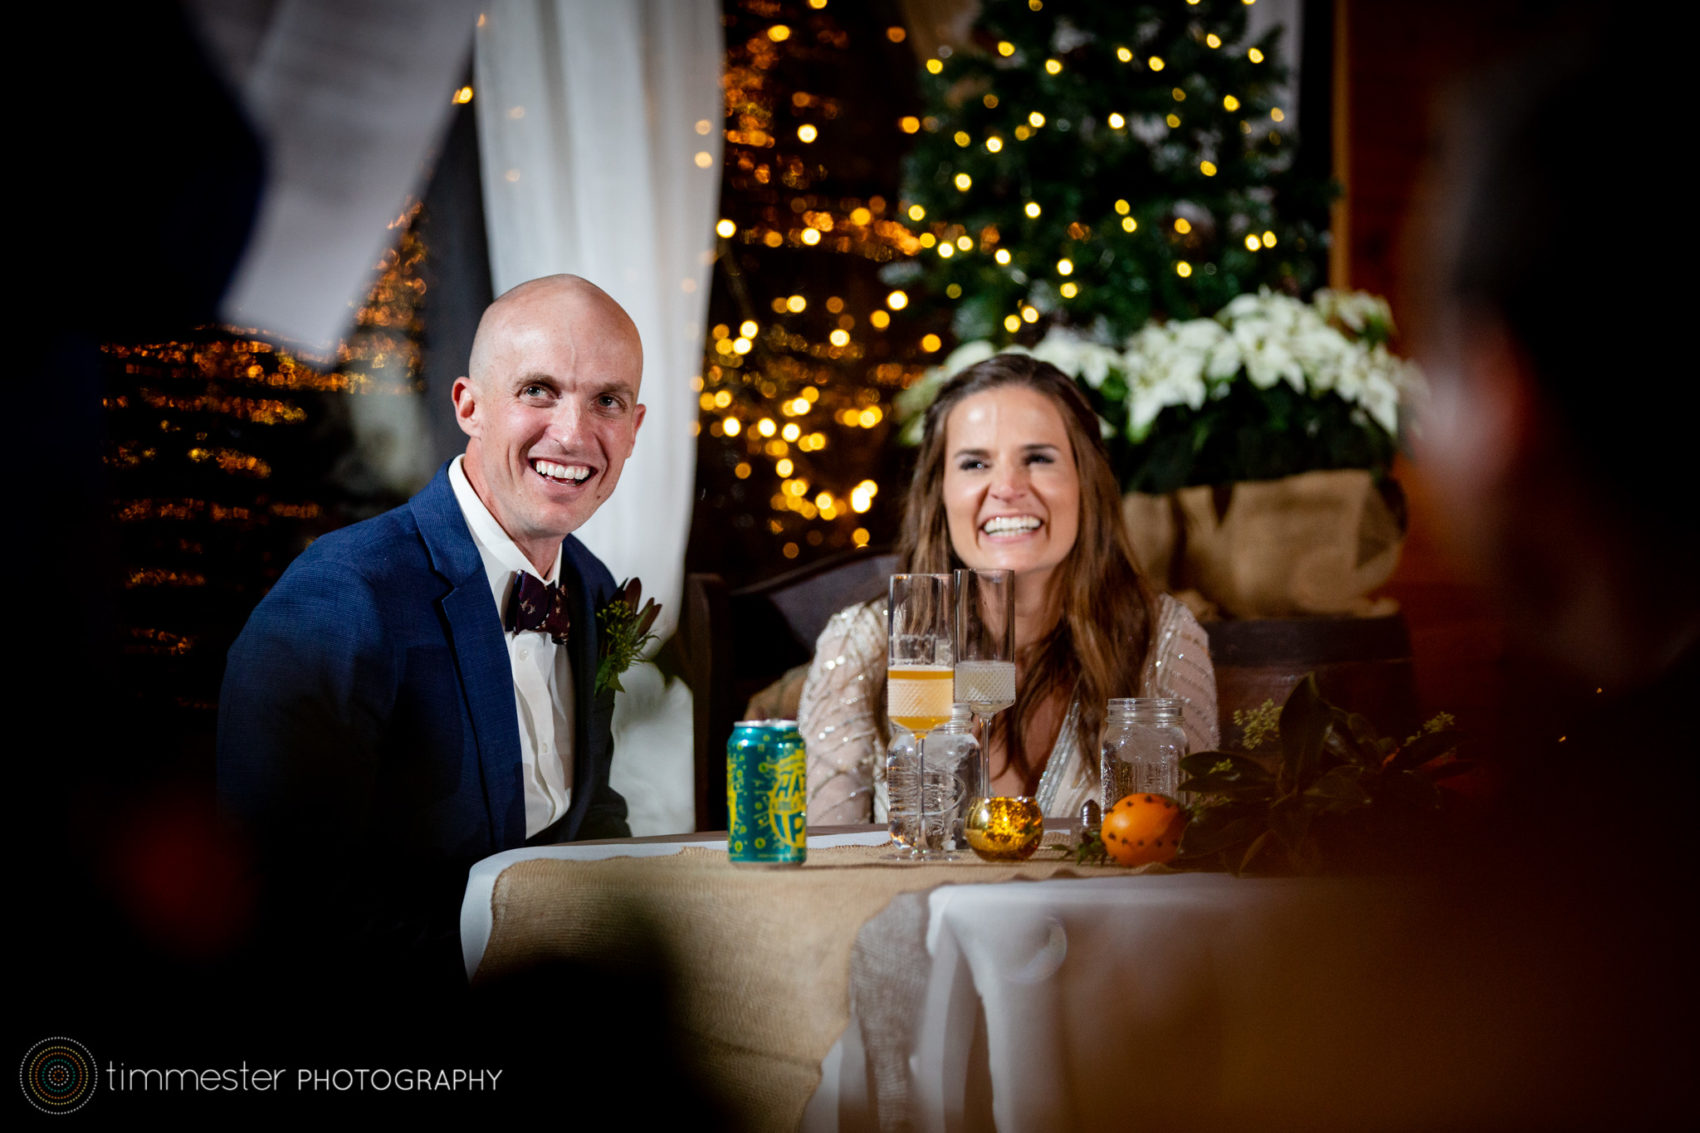 An indoor, winter wedding reception at Chapel Hill Carriage House